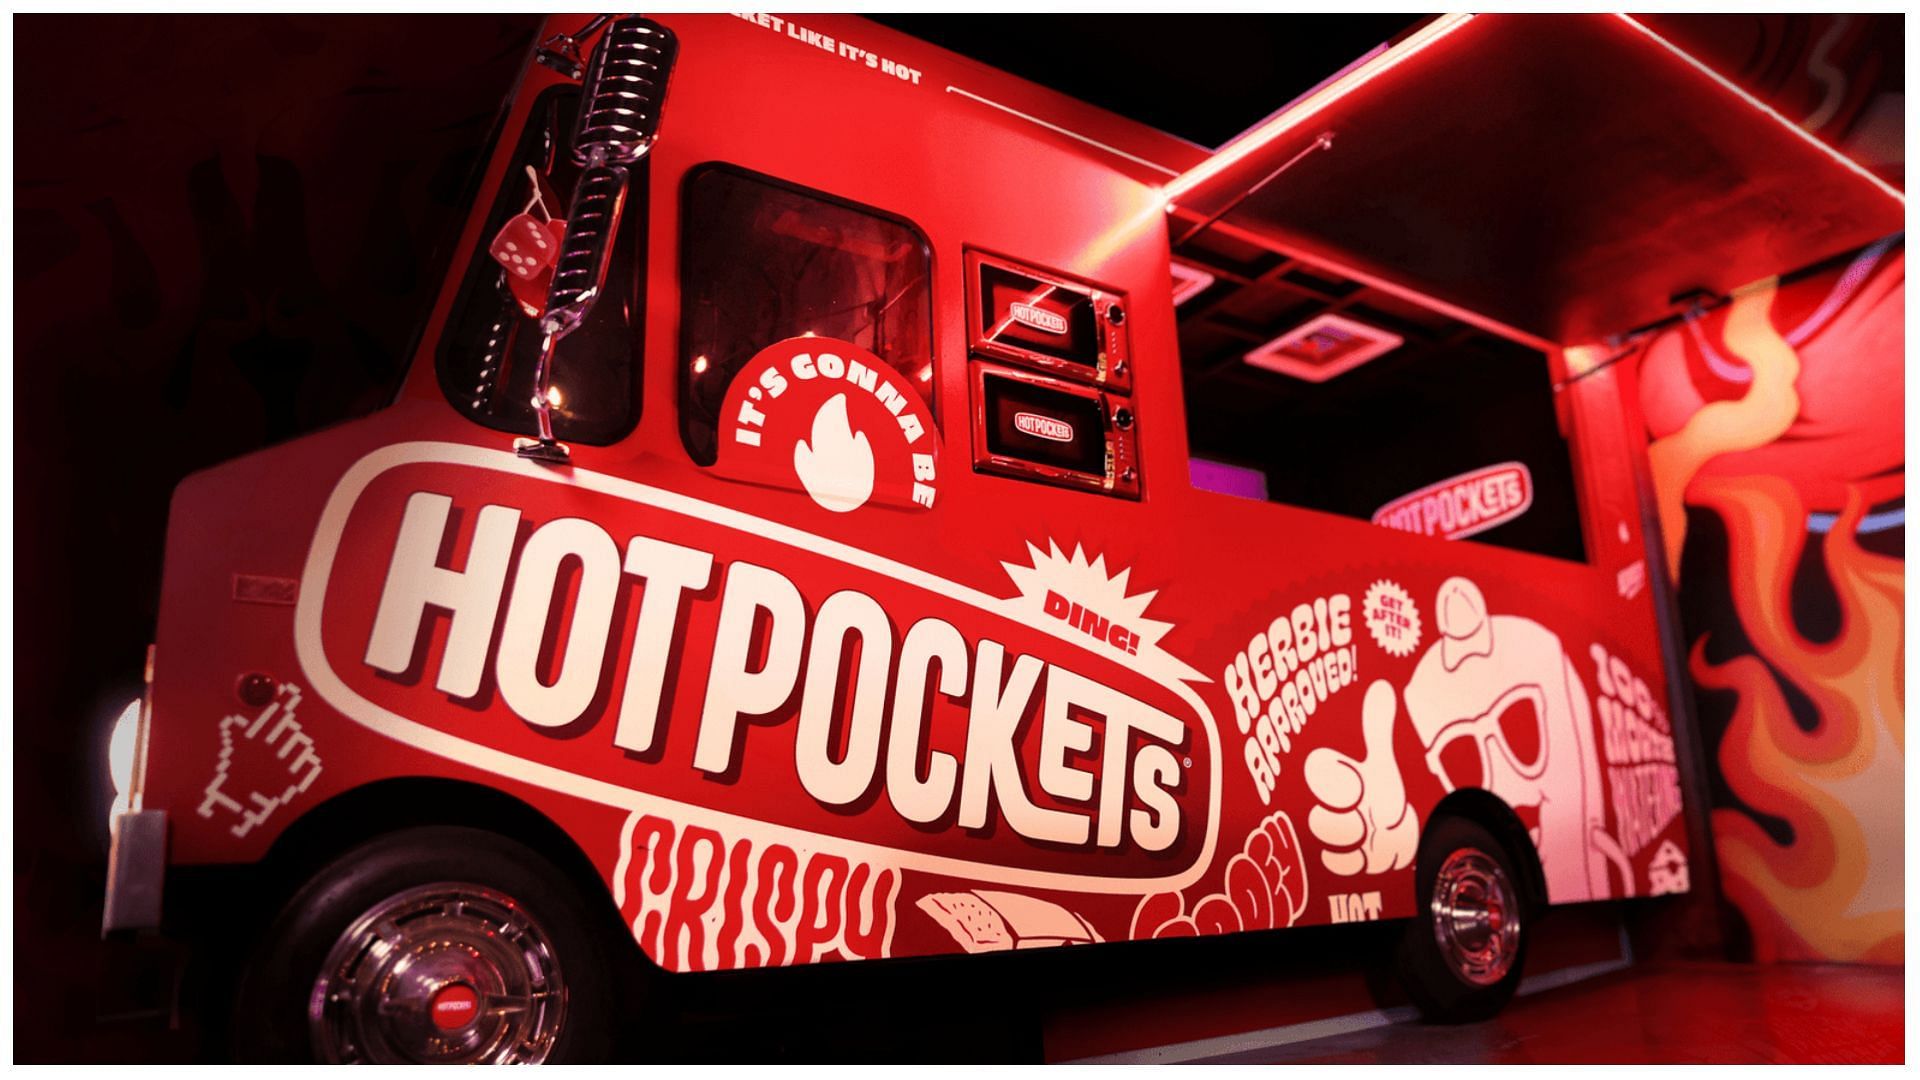 a Hot Pockets truck in the United States (Image via Interact Brands/Hot Pockets)